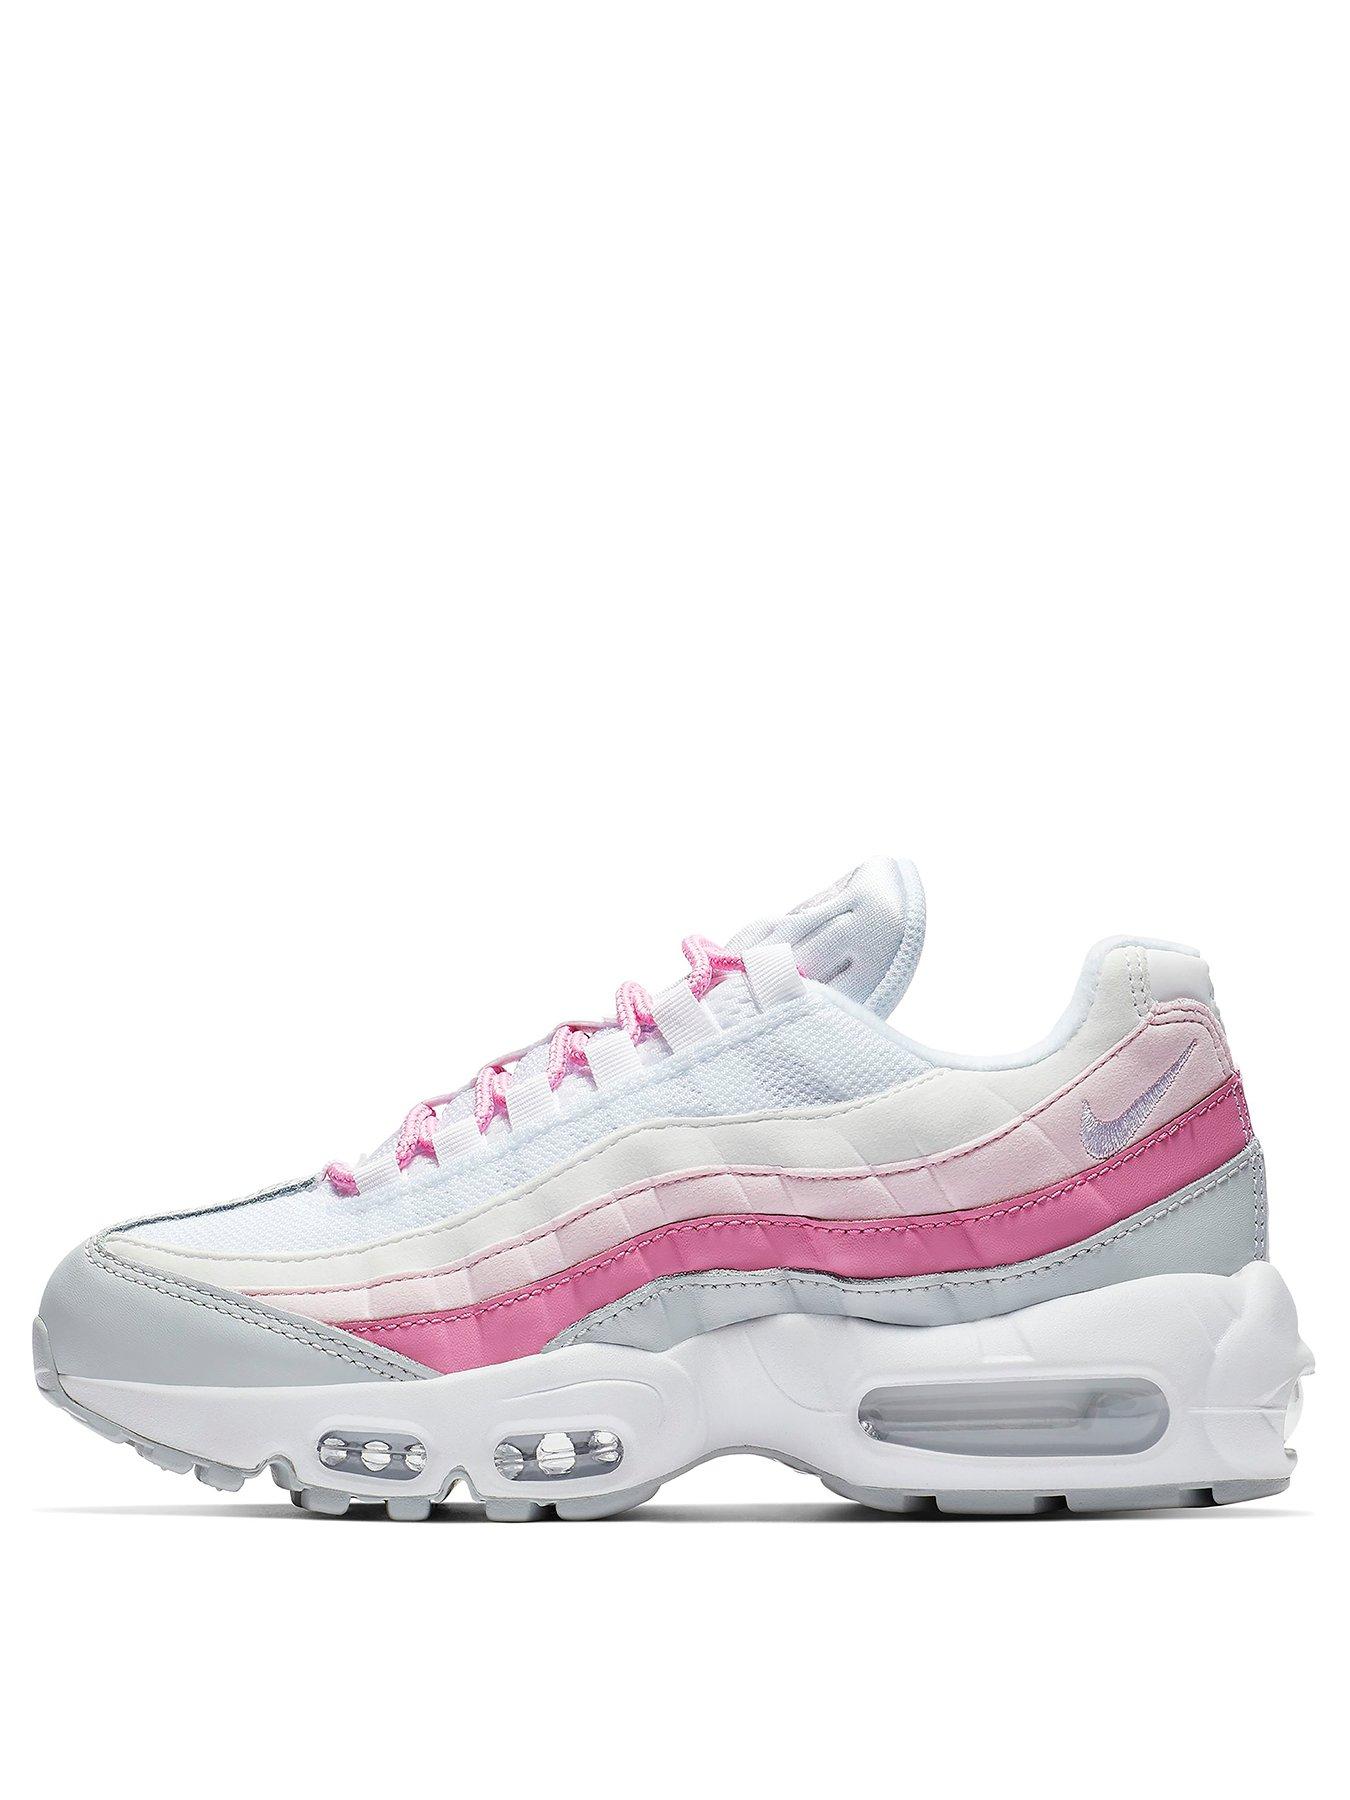 air max 95 white and pink